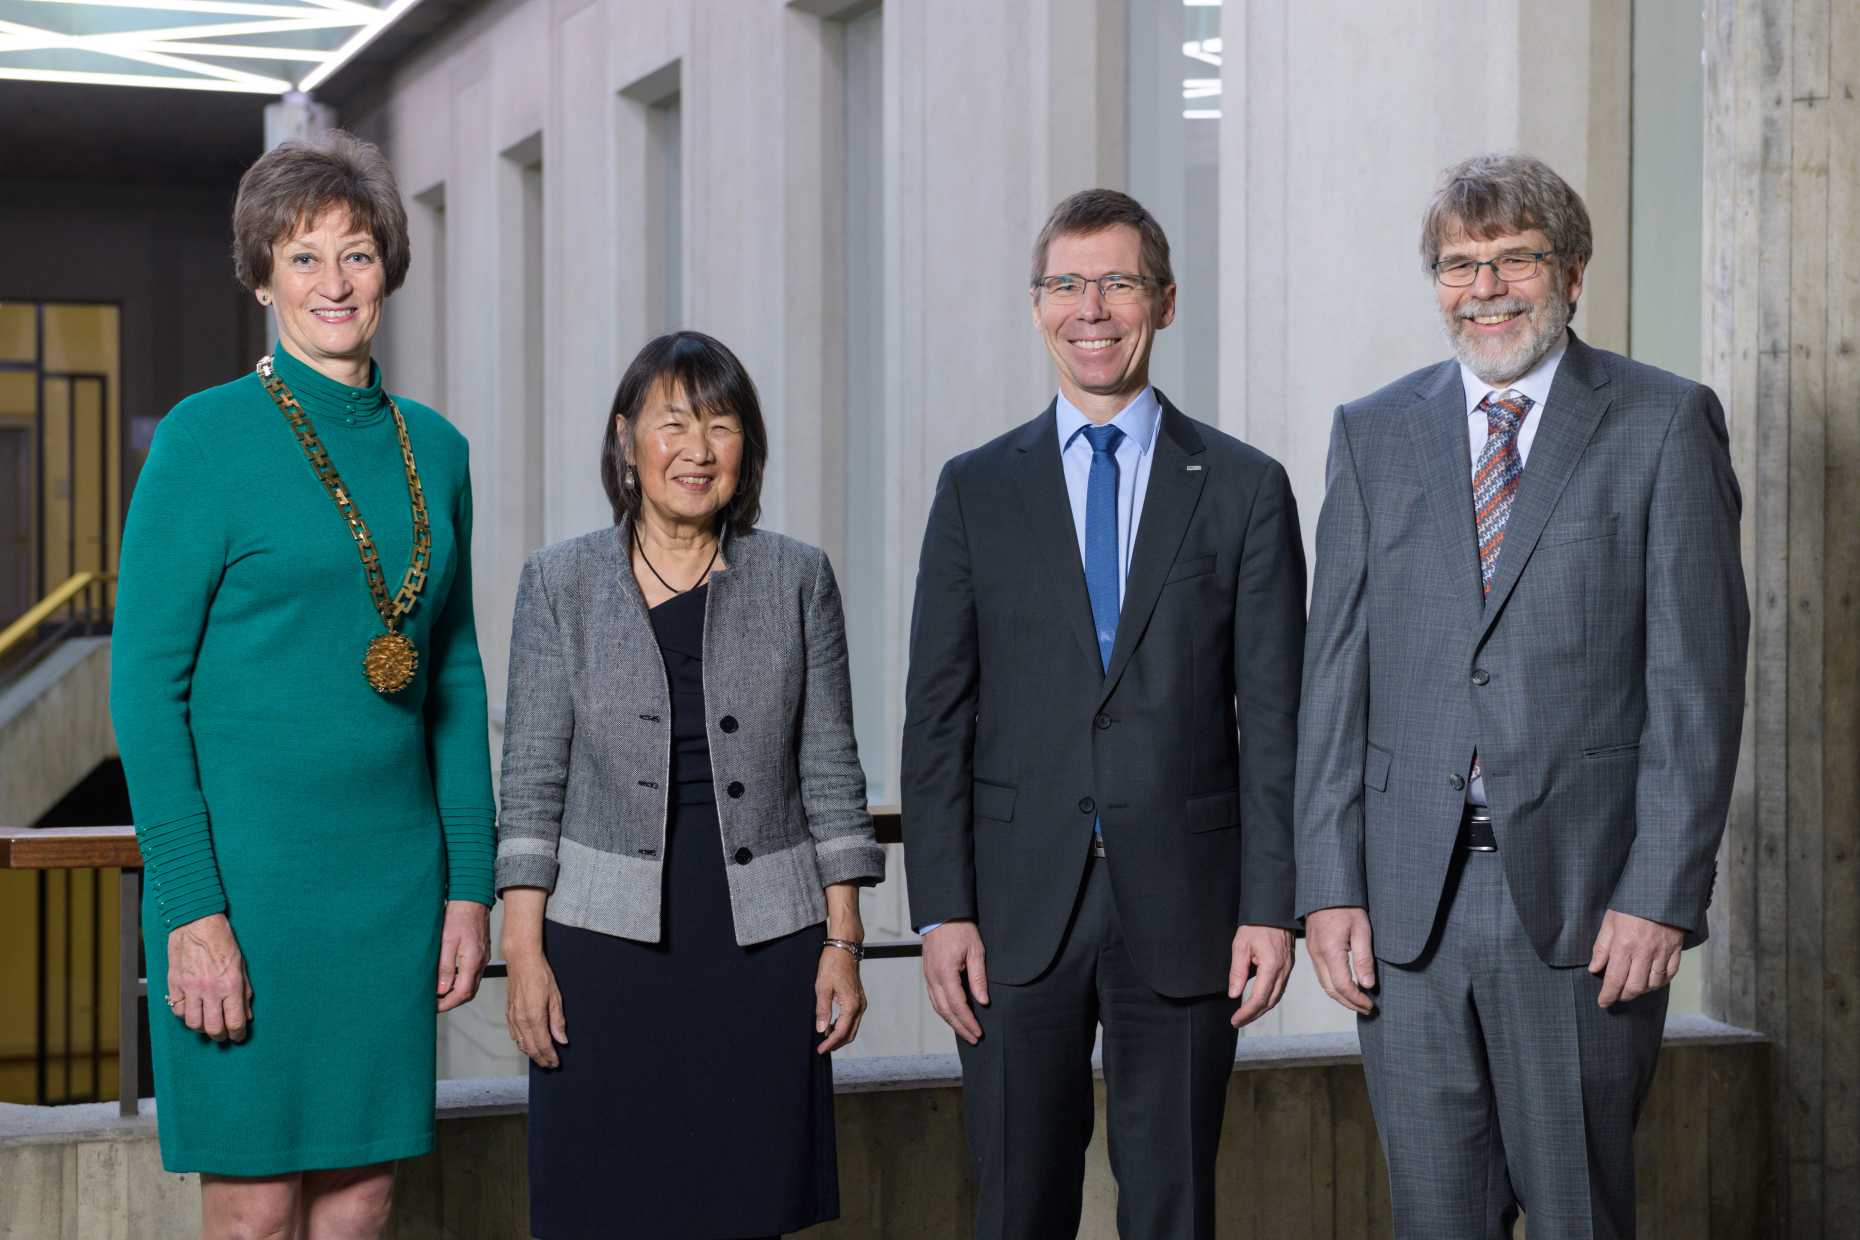 Enlarged view: ETH Rector Sarah Springman, honory doctor Evelyn Hu, ETH President Joël Mesot and Jérôme Faist, Head of the Department of Physics.